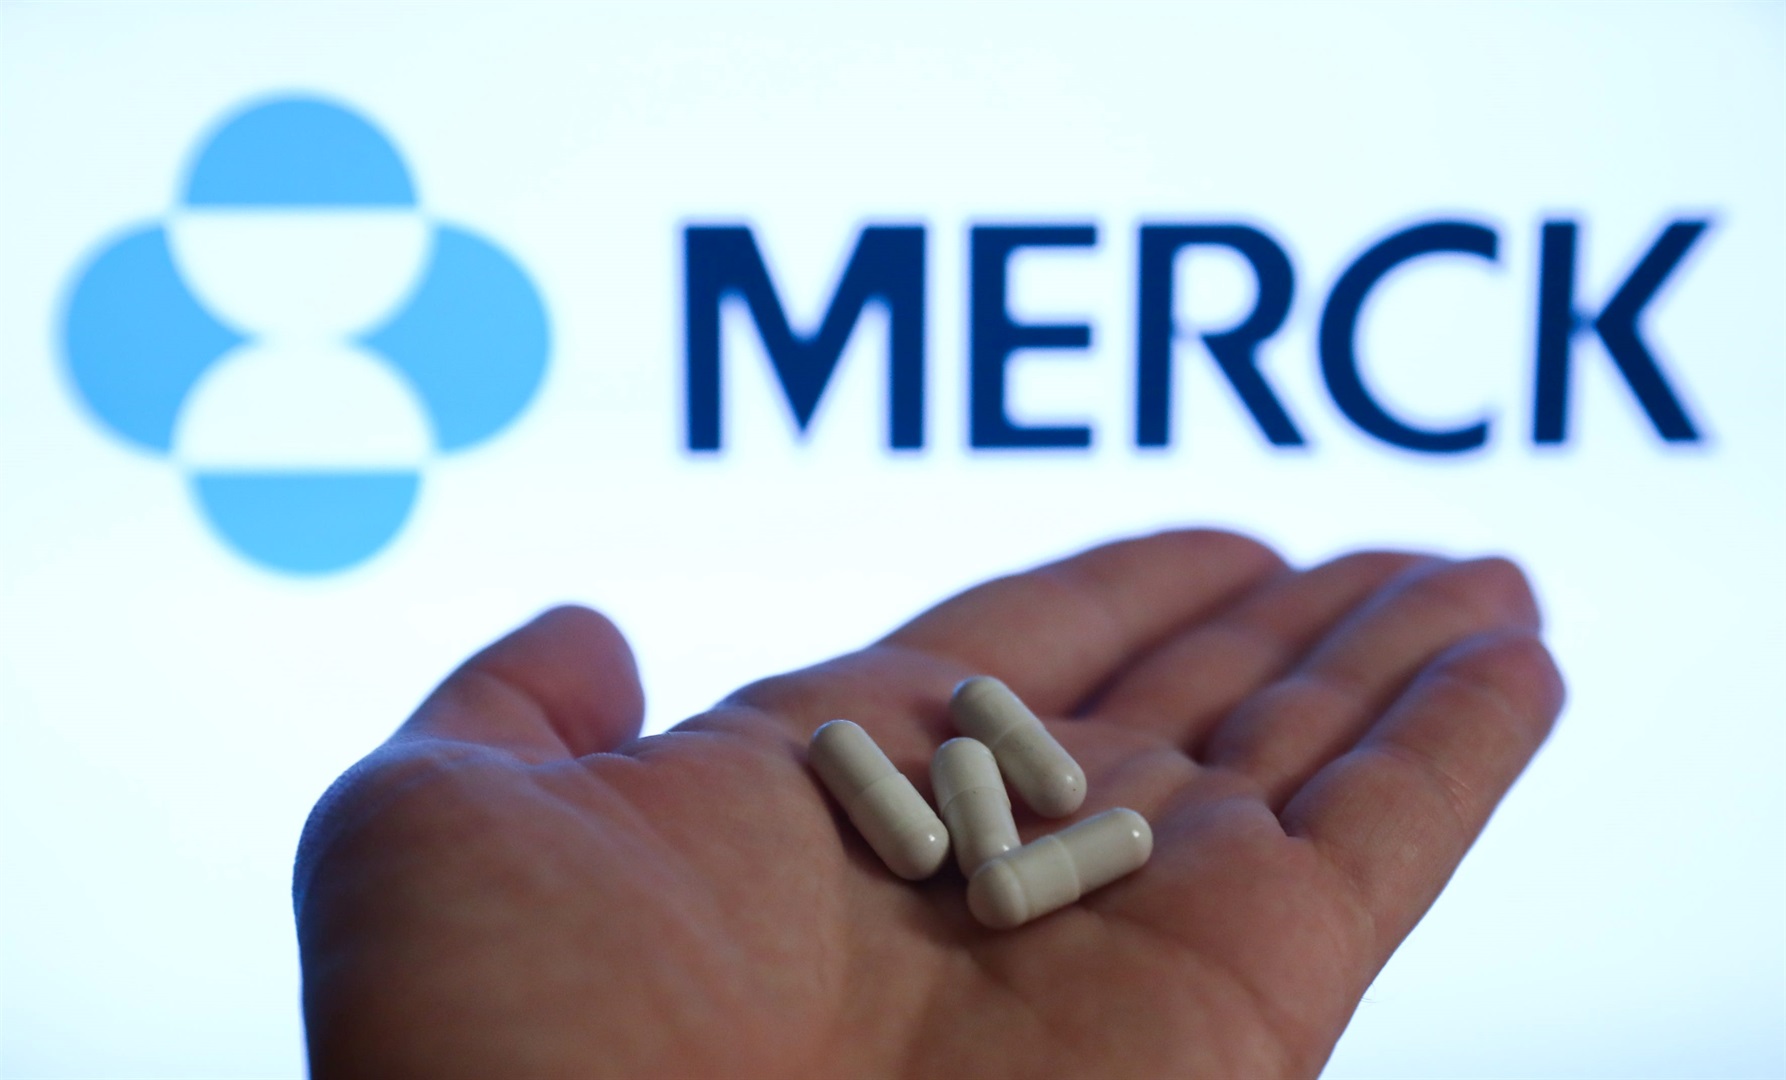 Pills seen with the Merck logo in the background.
